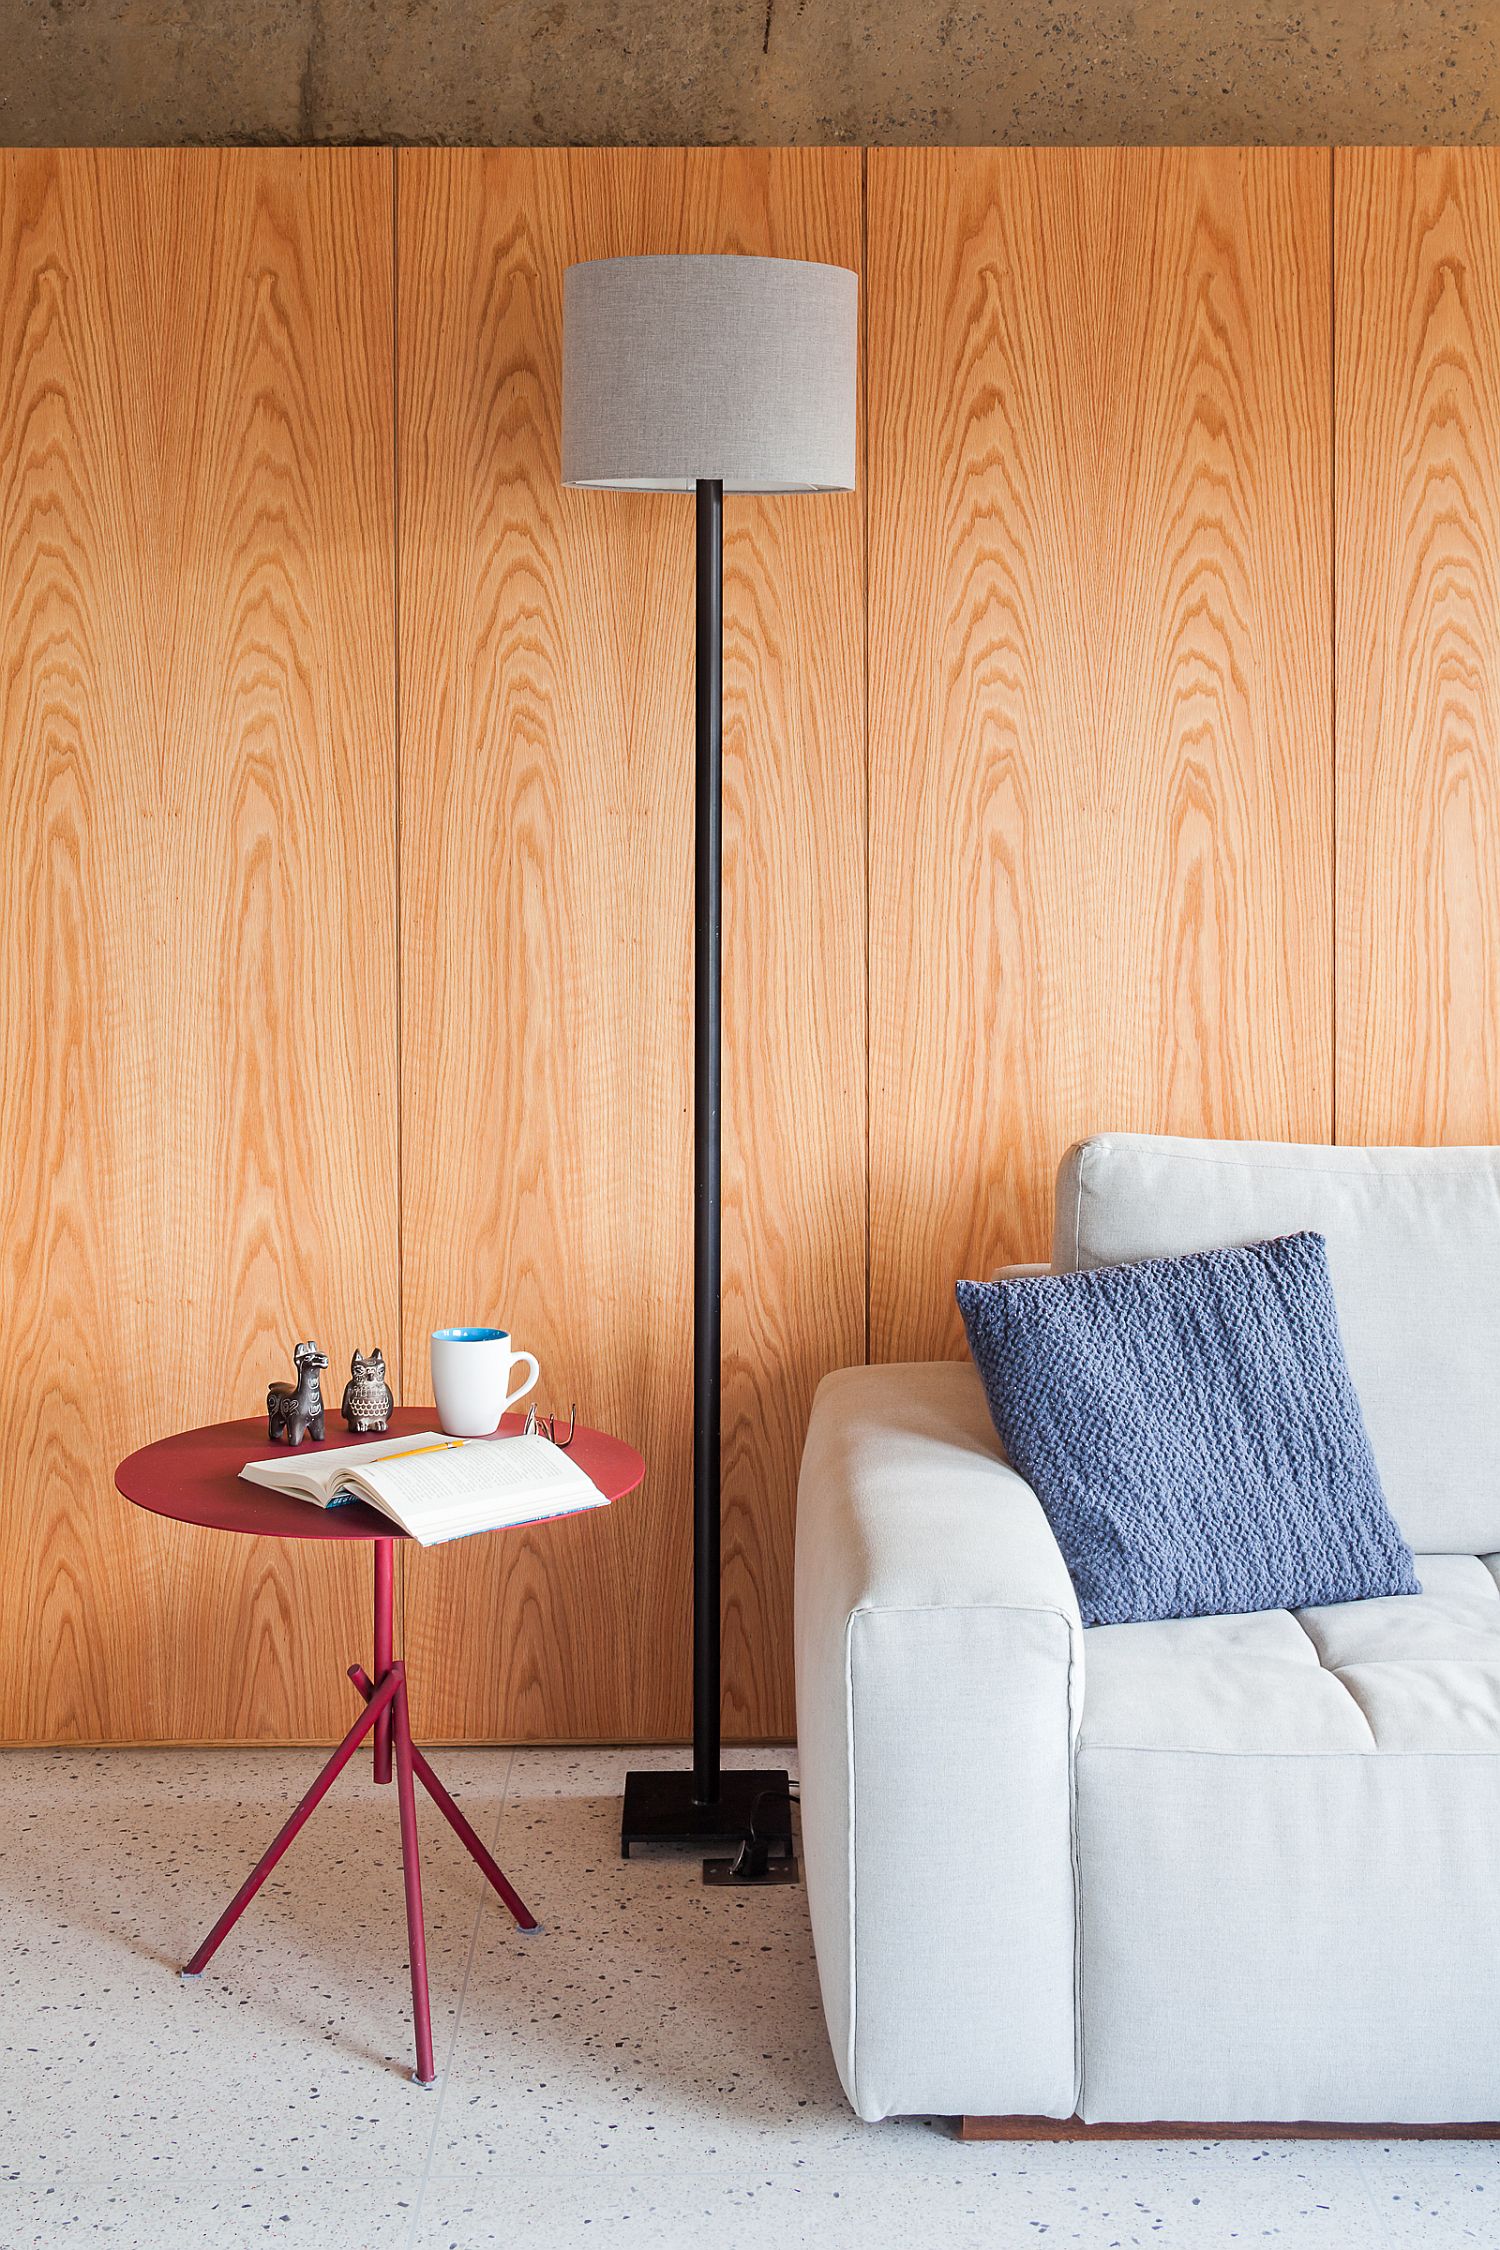 Wooden-wall-panels-bring-coziness-to-the-apartment